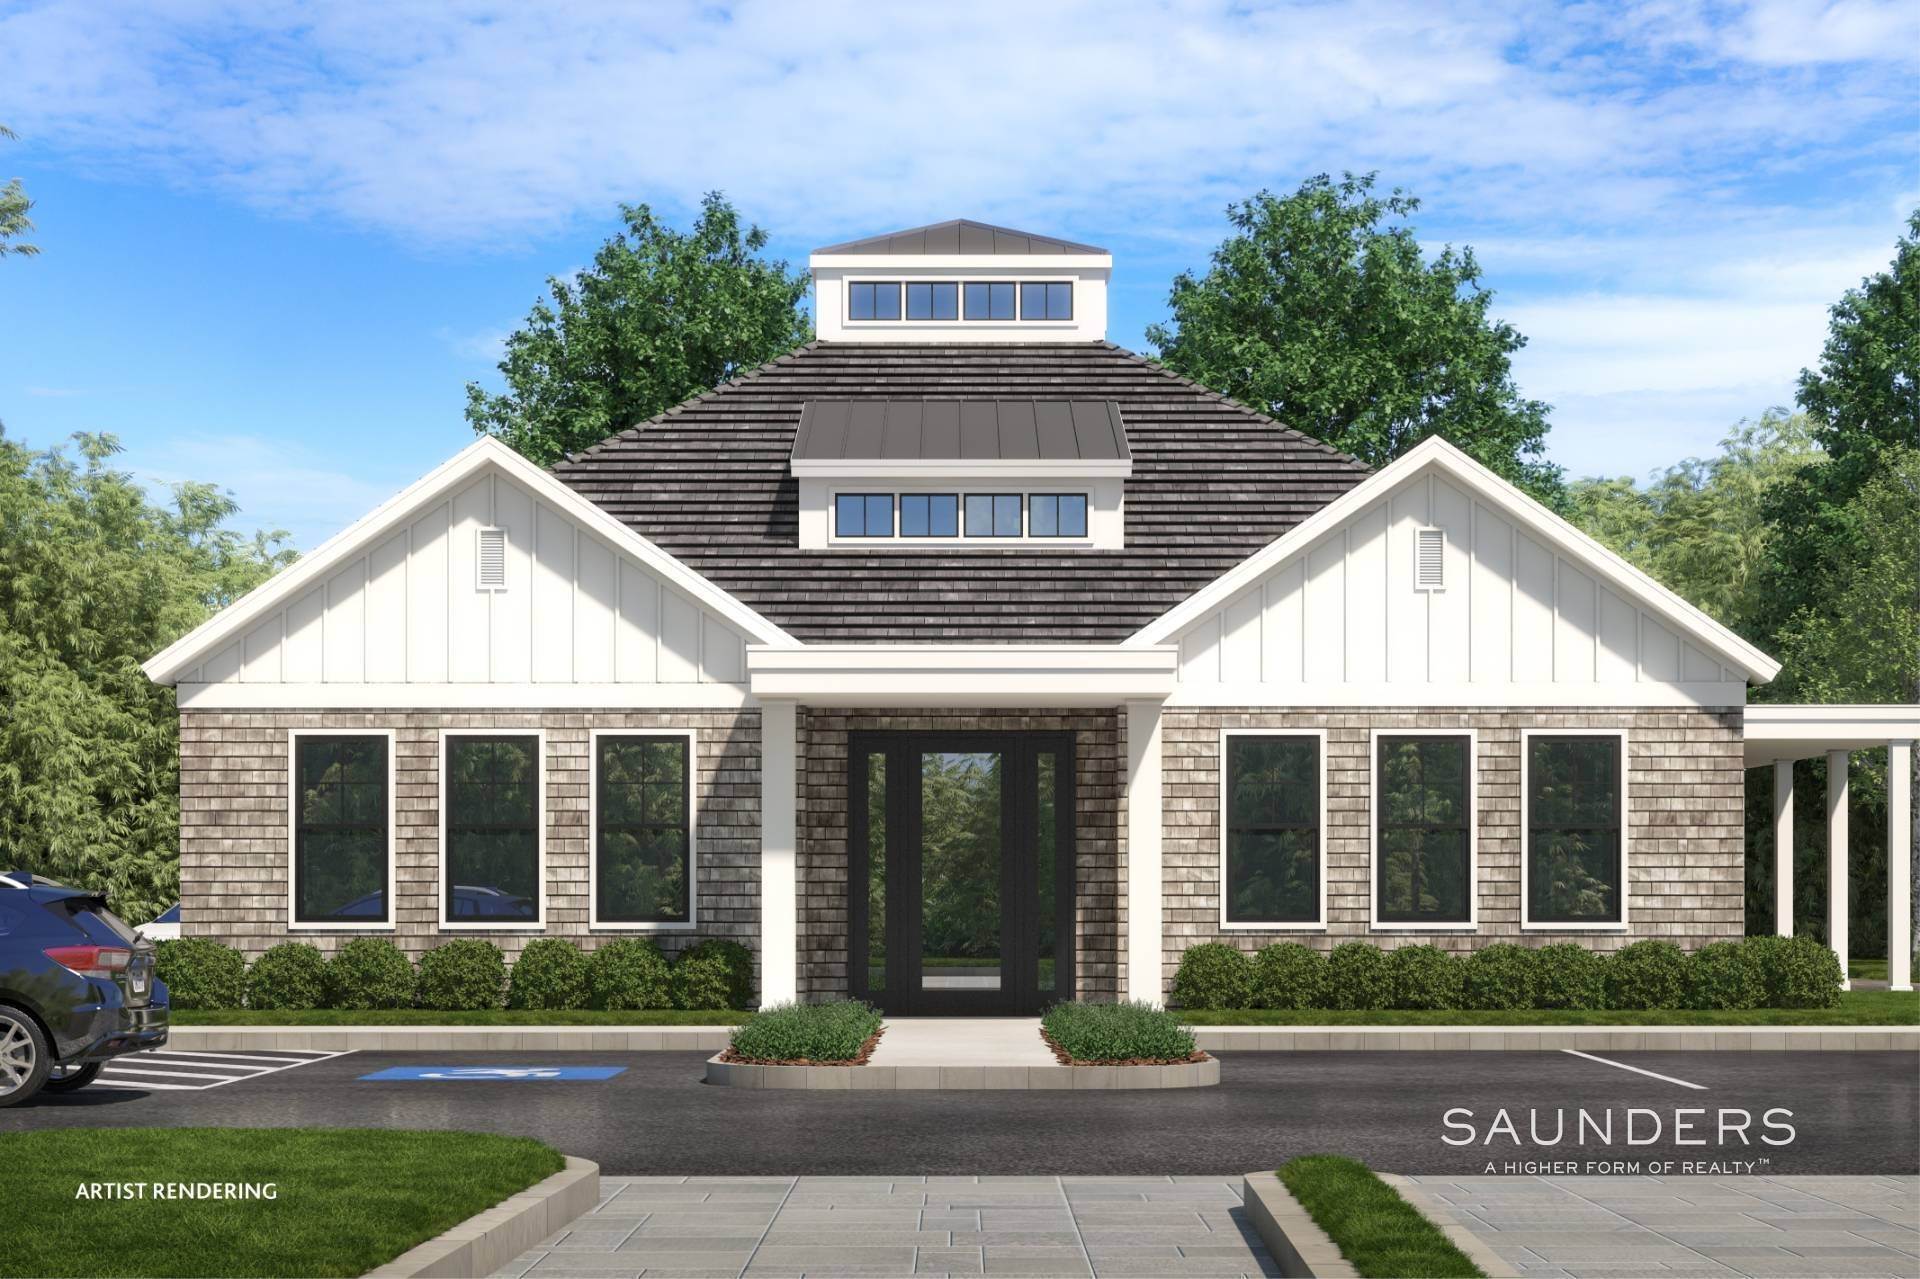 2. Townhouse for Sale at Watermill Crossing - New Luxury Townhomes 20 Magnolia Drive (Watermill Crossing Showroom 14 Main Street), Southampton, NY 11968